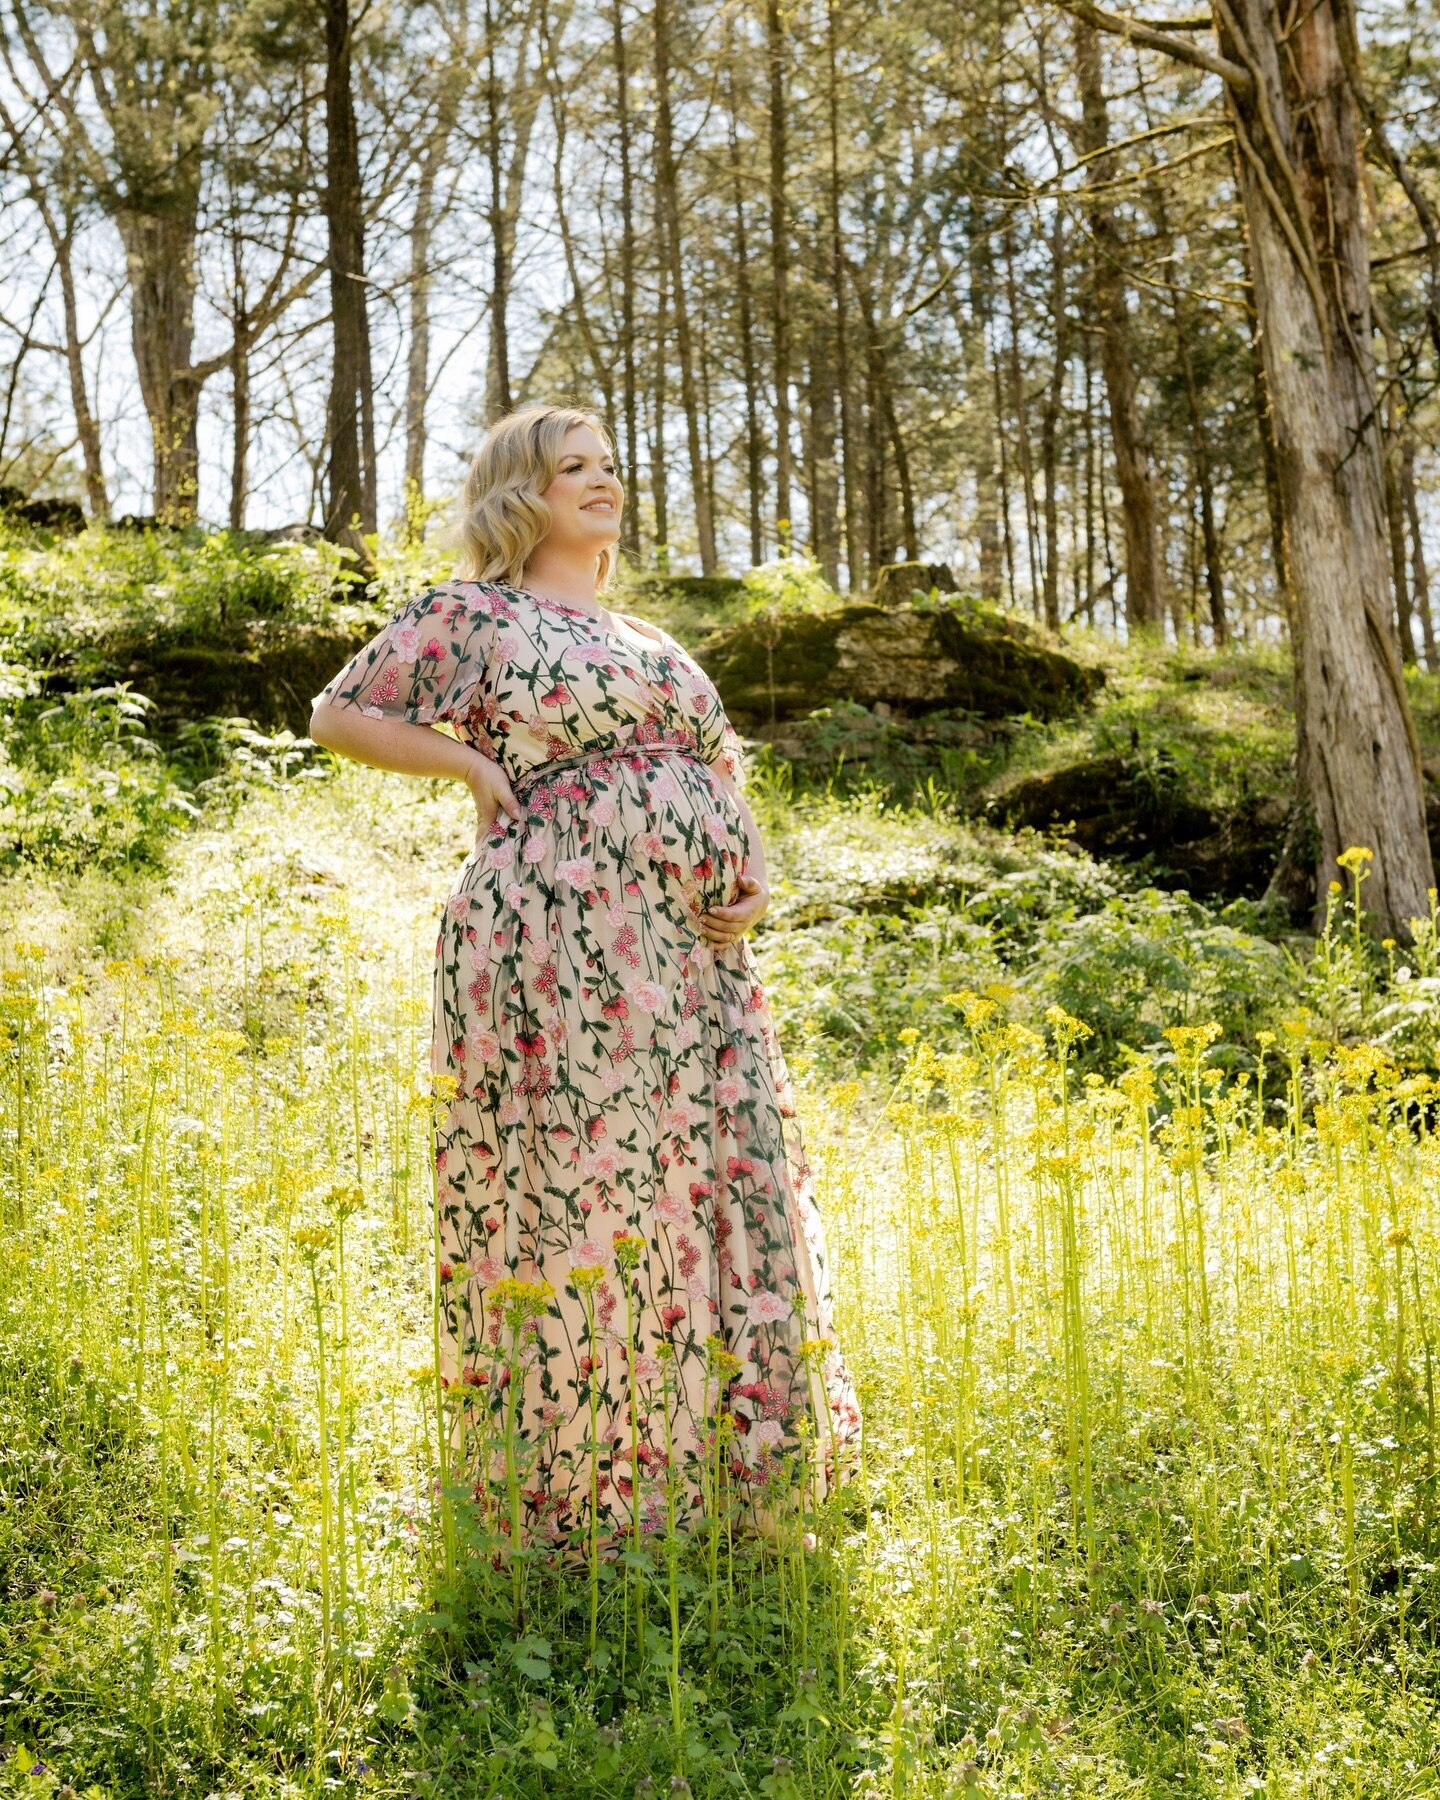 Beautiful Bethany in a springtime maternity portrait.